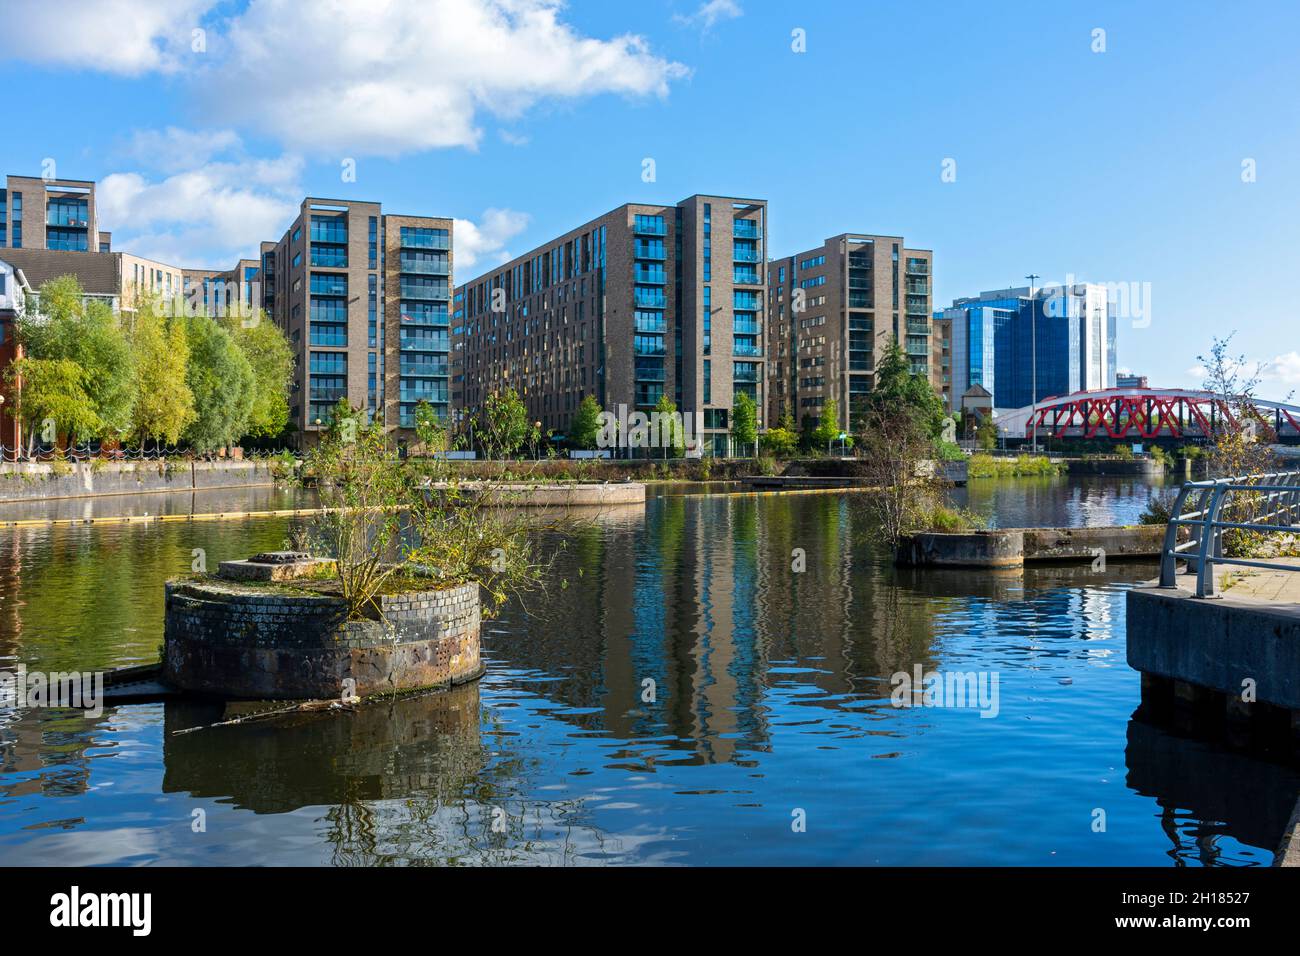 The Clippers Quay apartment blocks and the Exchange Quay office buildings over the Manchester Ship Canal, Salford, Manchester, England, UK Stock Photo